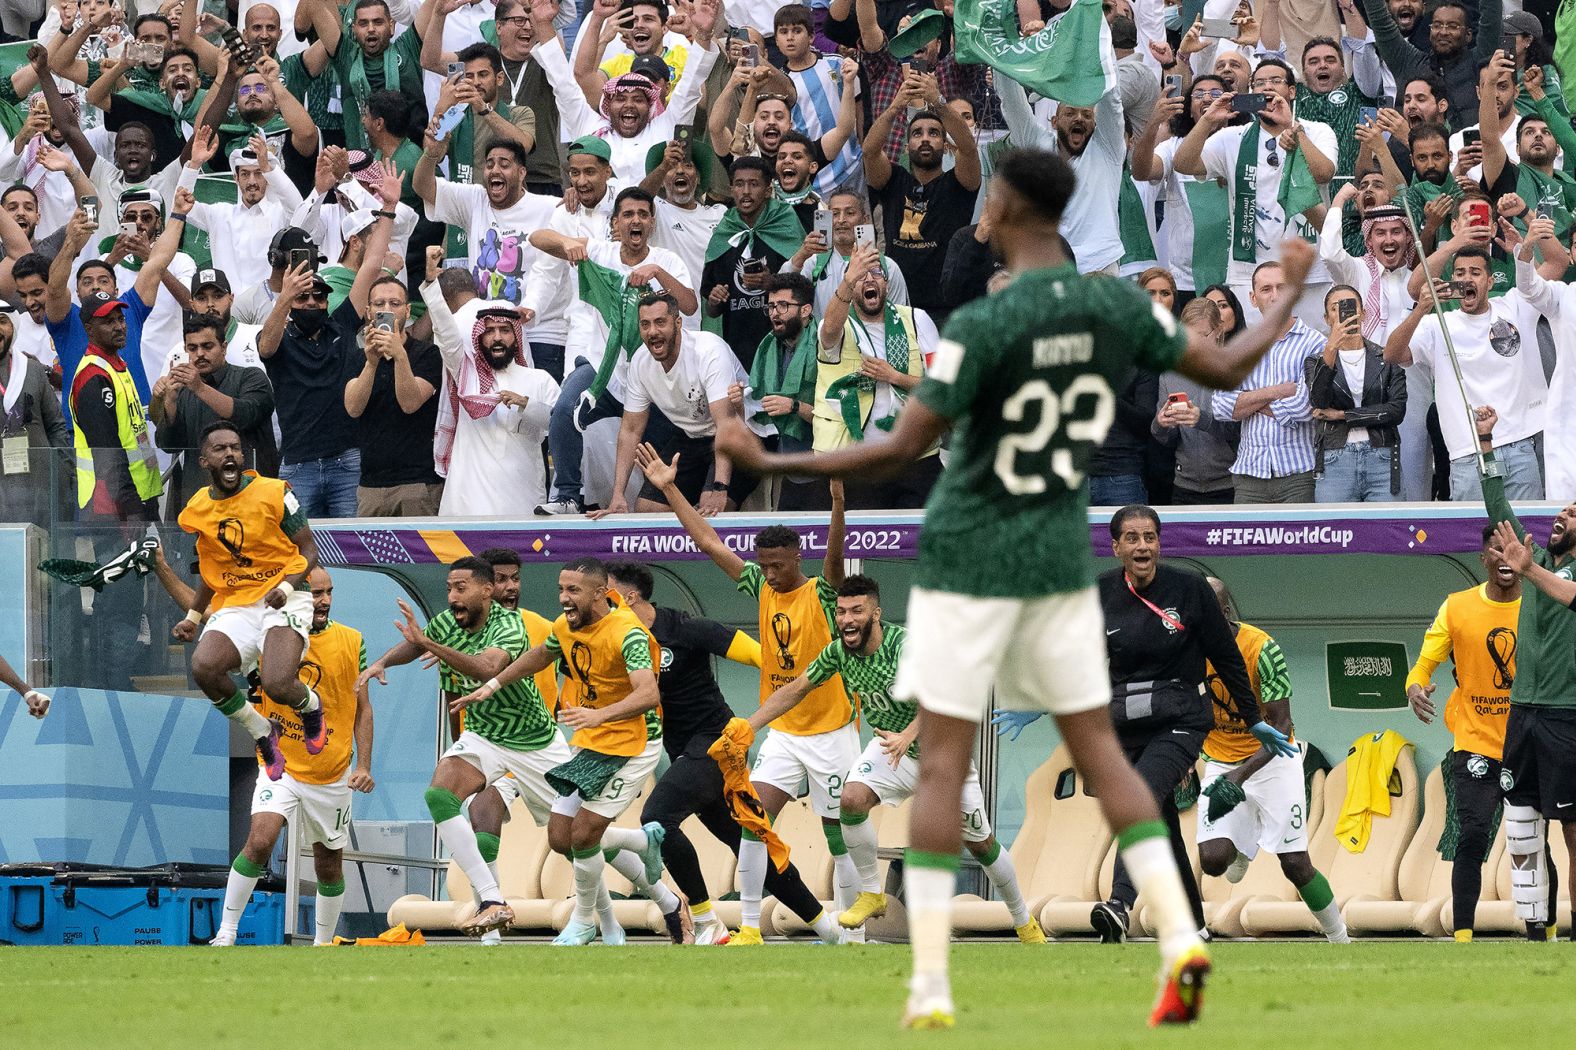 Saudi Arabia players celebrate their victory over Argentina on November 22. The 2-1 result was <a href="index.php?page=&url=https%3A%2F%2Fwww.cnn.com%2F2022%2F11%2F22%2Ffootball%2Flionel-messi-argentina-saudi-arabia-2022-world-cup-spt-intl" target="_blank">one of the biggest upsets in World Cup history</a>.